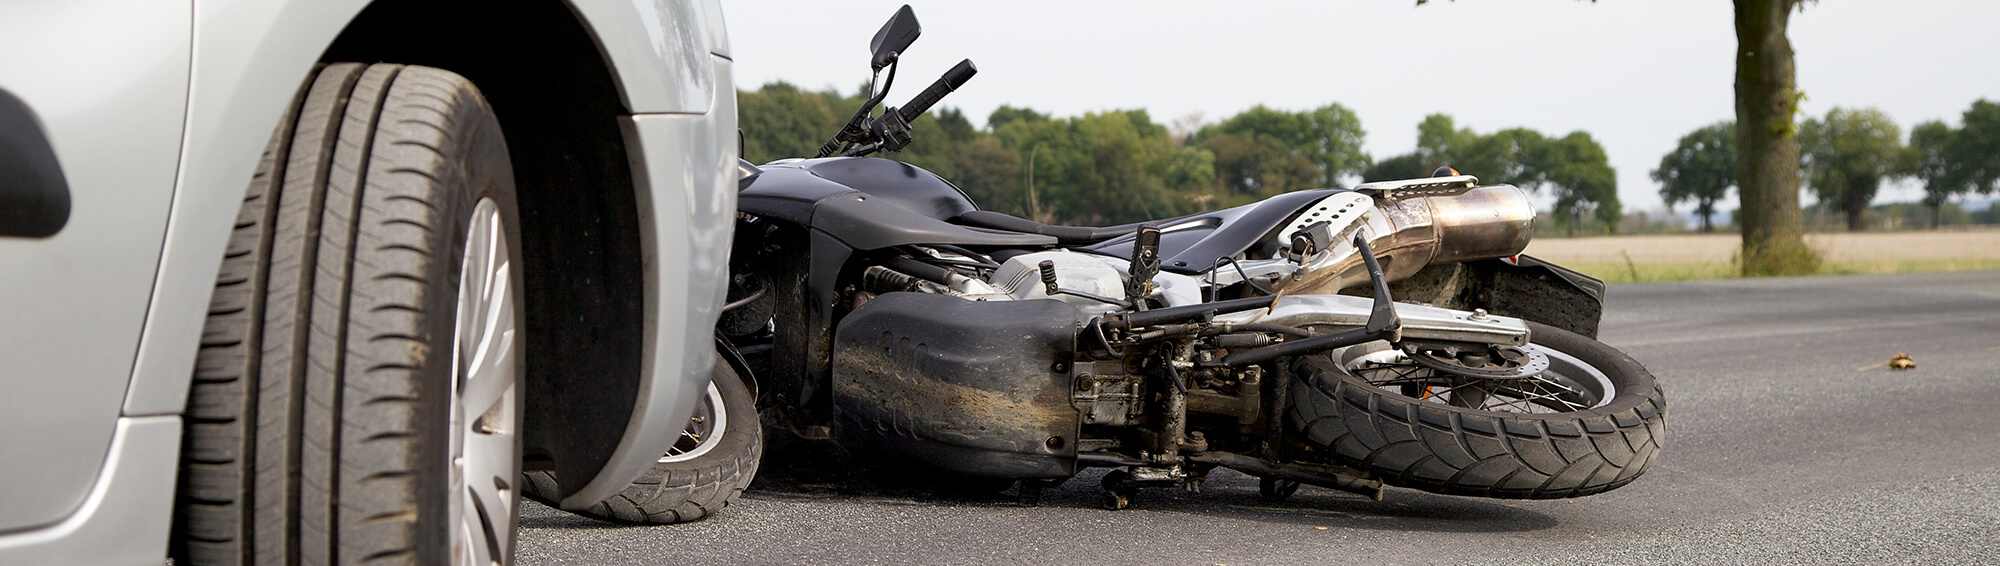 Don’t Let the Insurance Company Bully You After a Motorcycle Accident